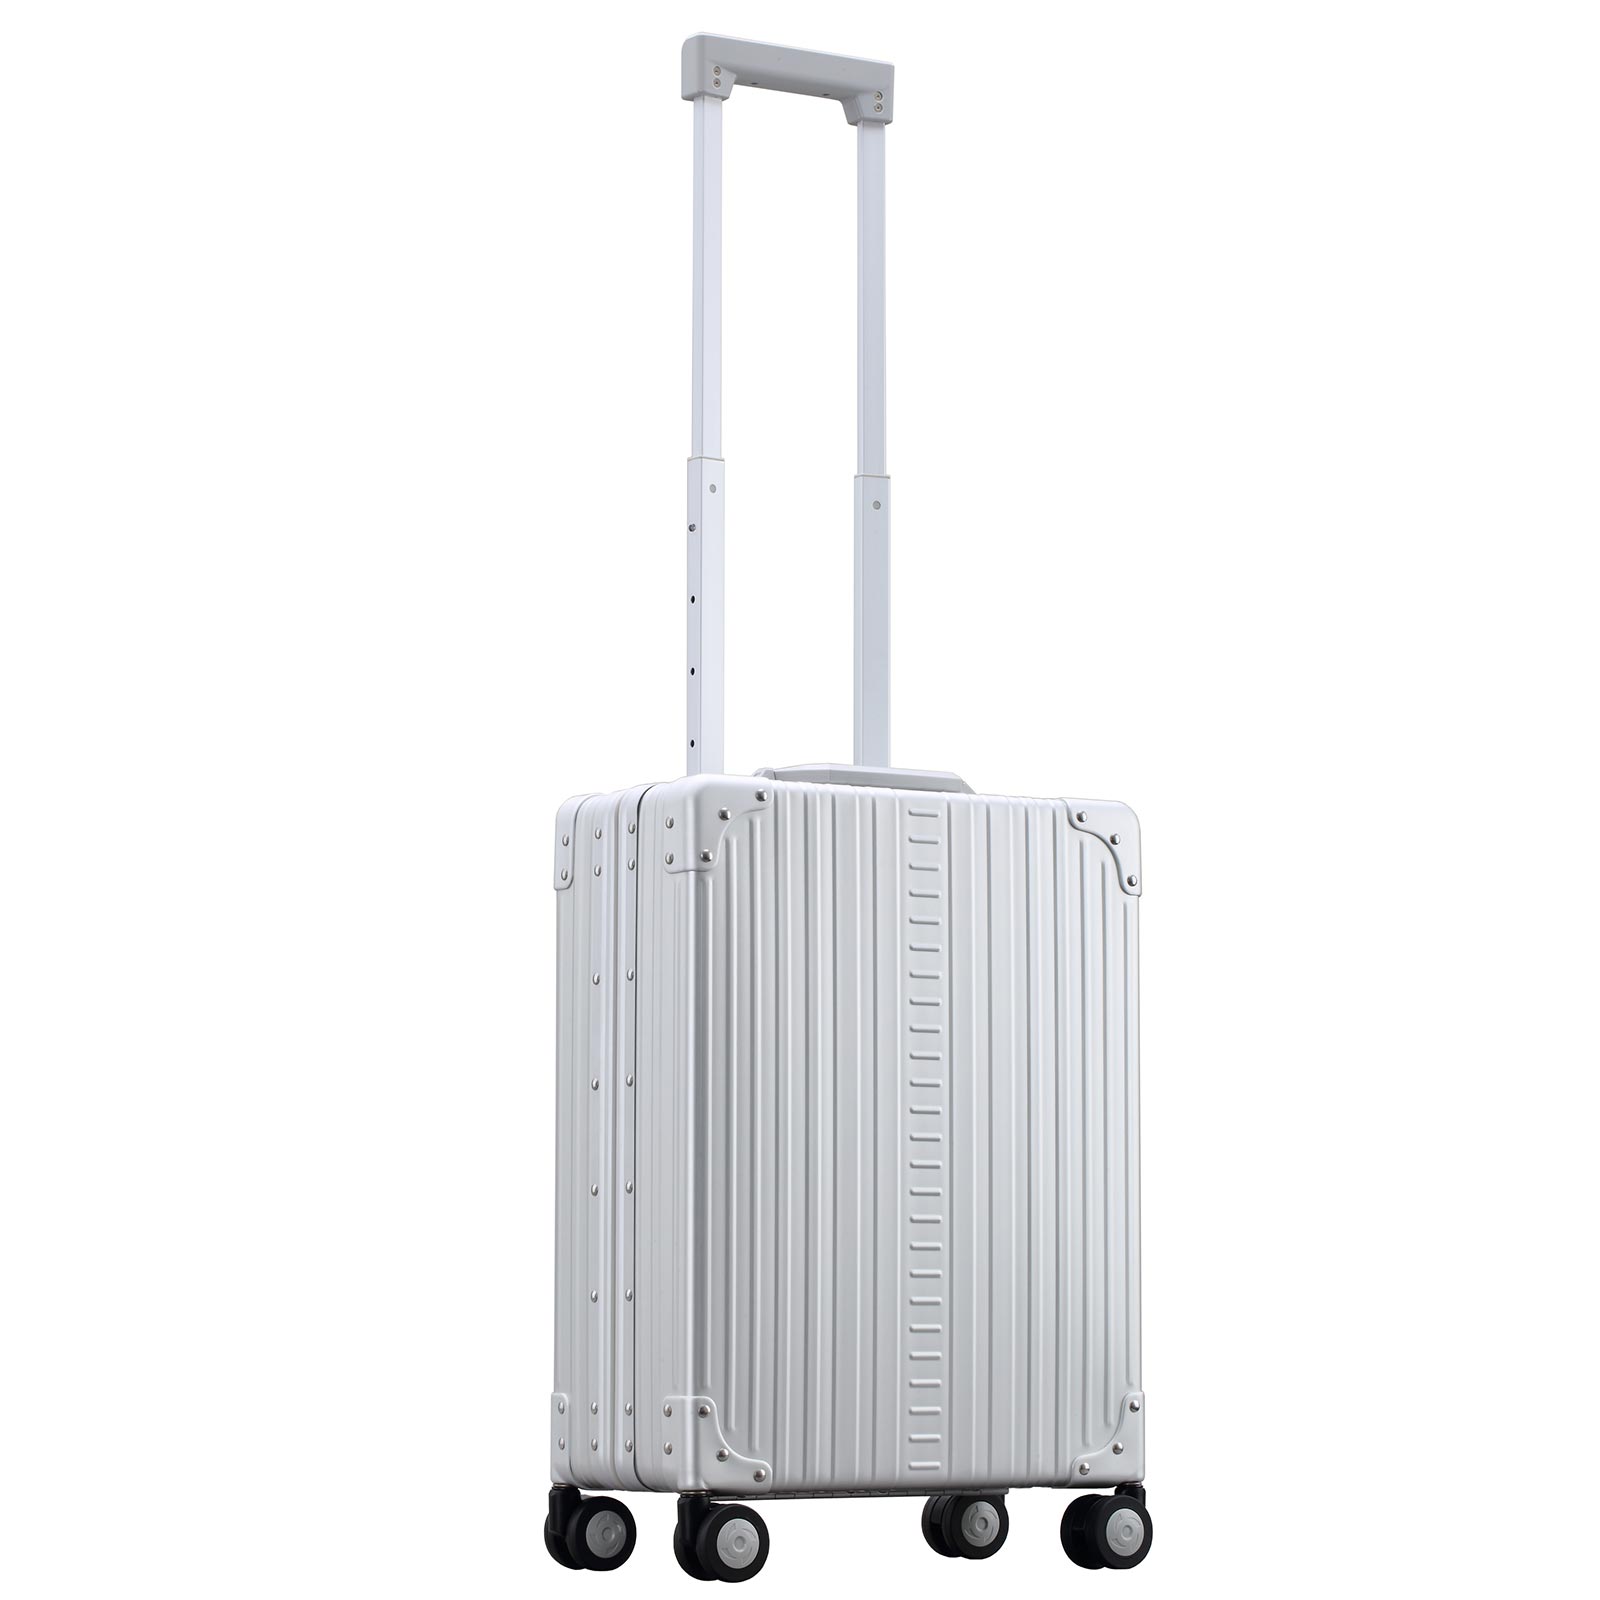 ALEON Vertical Business Carry-On 21"Kabinentrolley 55 cm 4 Rollen, Silber